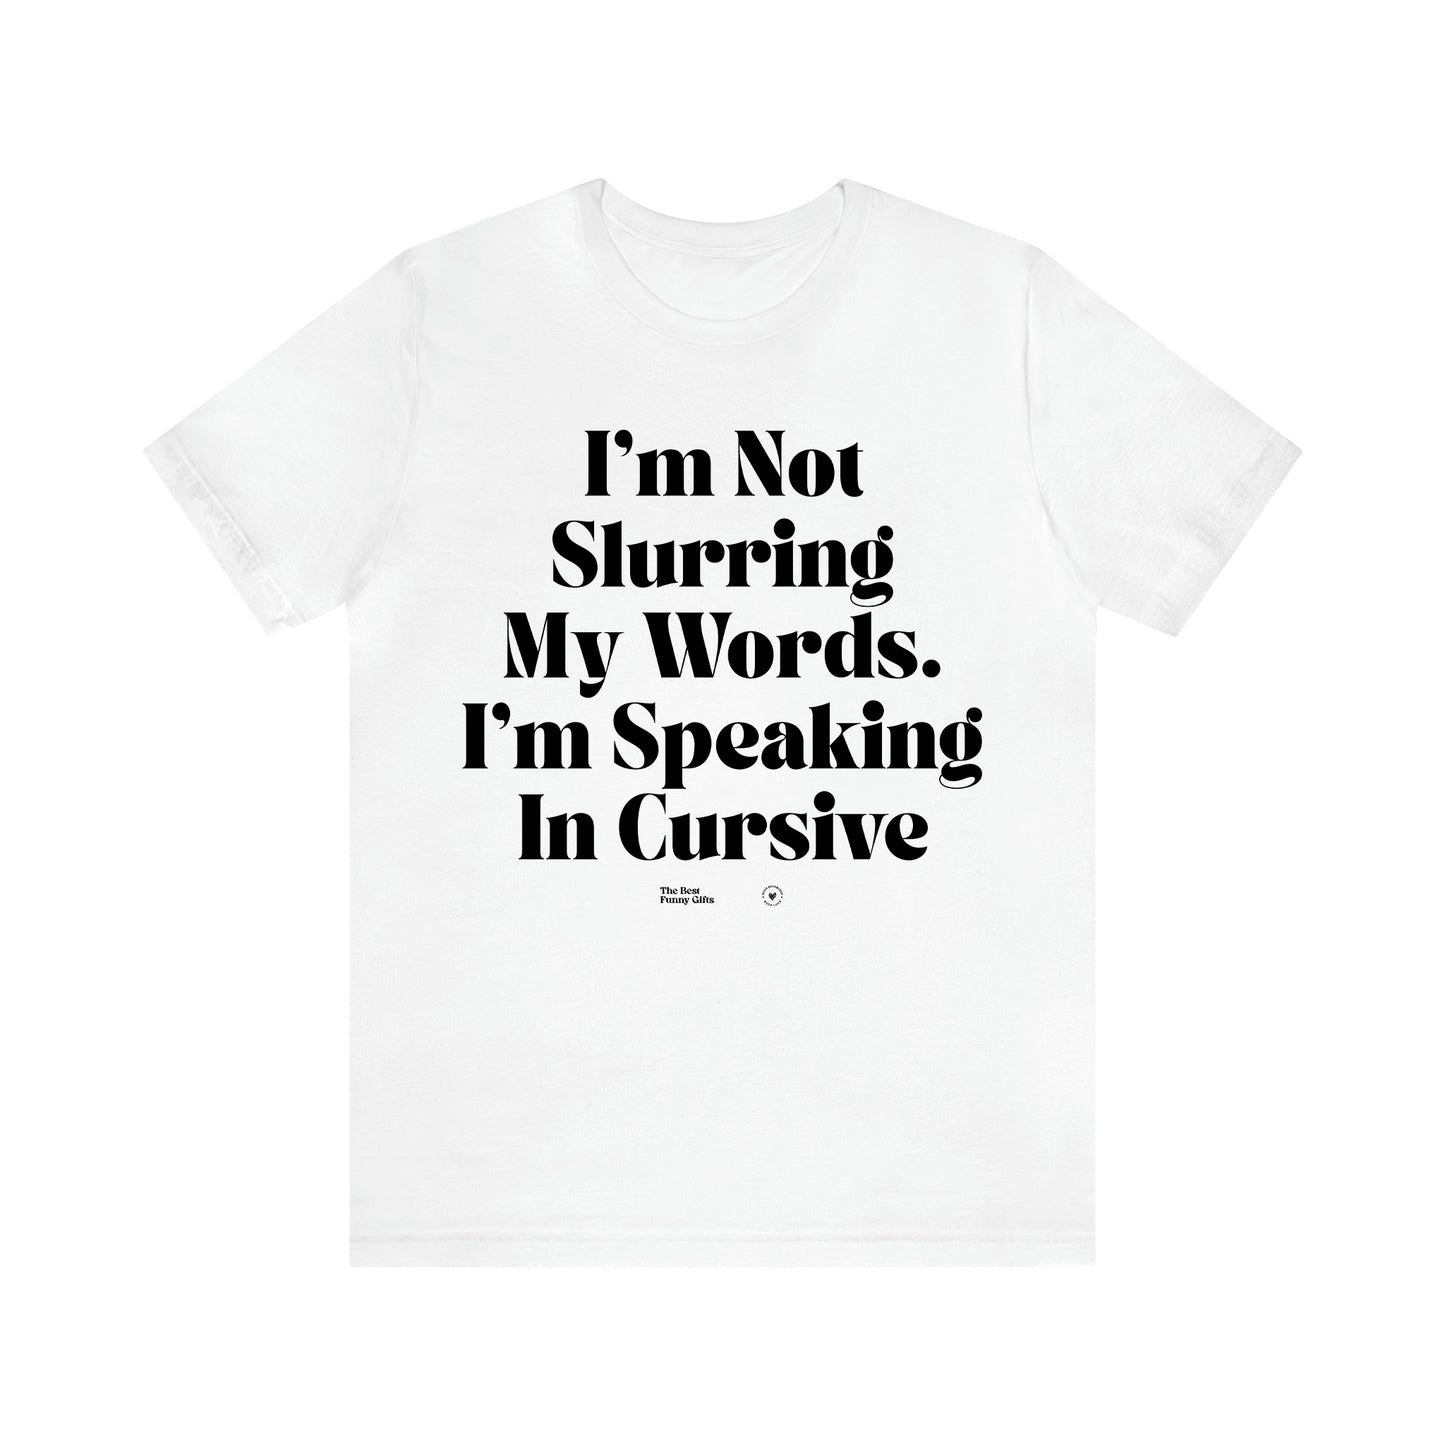 Women's T Shirts I'm Not Slurring My Words. I'm Speaking Cursive - The Best Funny Gifts